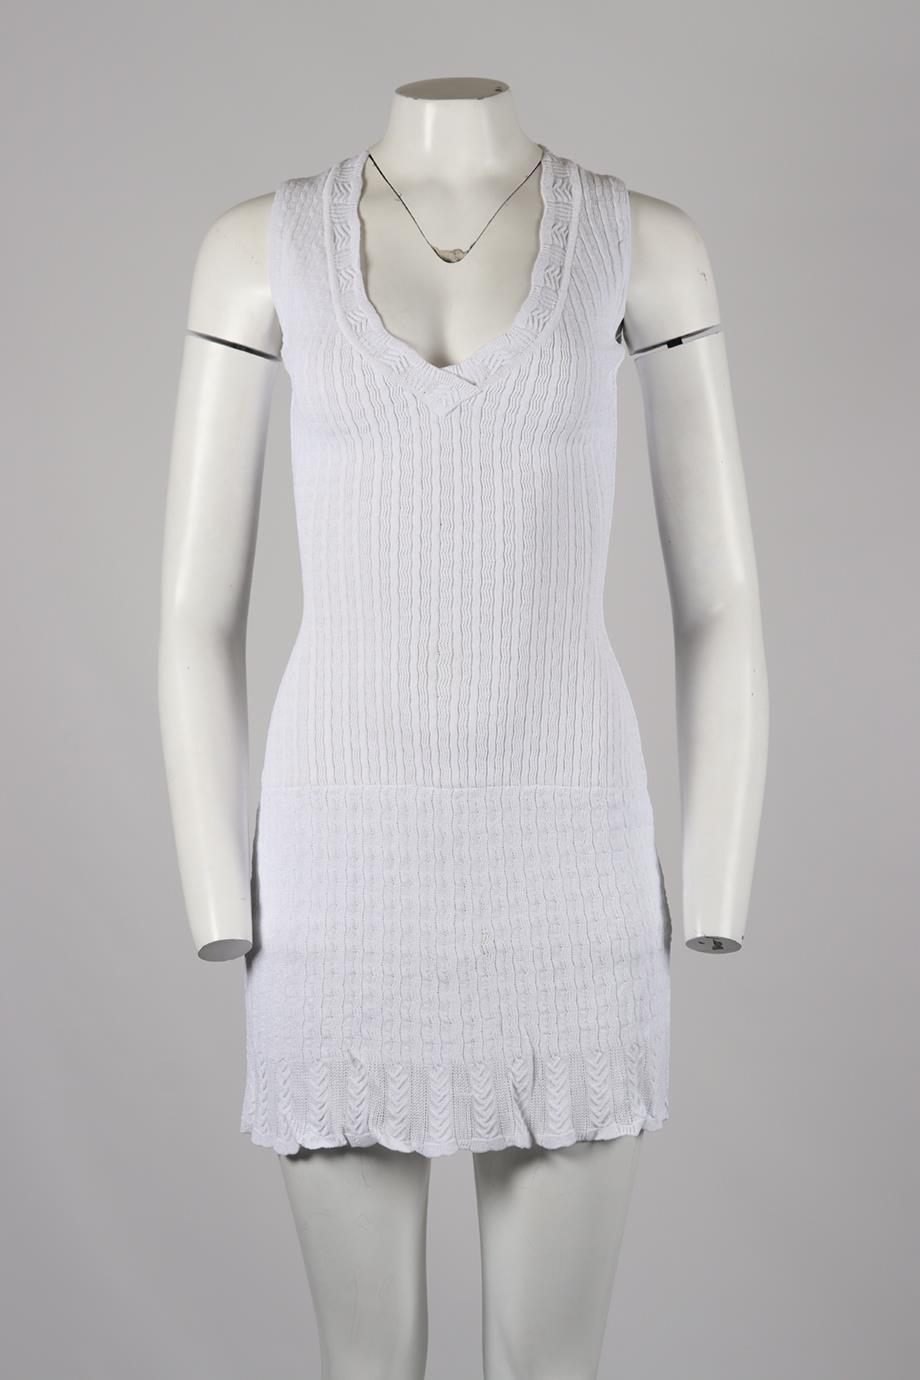 Azzedine Alaïa Vintage Stretch Knit Mini Dress. White. Sleeveless. V-Neck. Zip fastening - Back. 90% Viscose, 6% polyamide, 4% elastane. XSmall (UK 6, US 2, FR 34, IT 38). Bust: 30 in. Waist: 24 in. Hips: 38 in. Length: 32.5 in. Condition: Used.